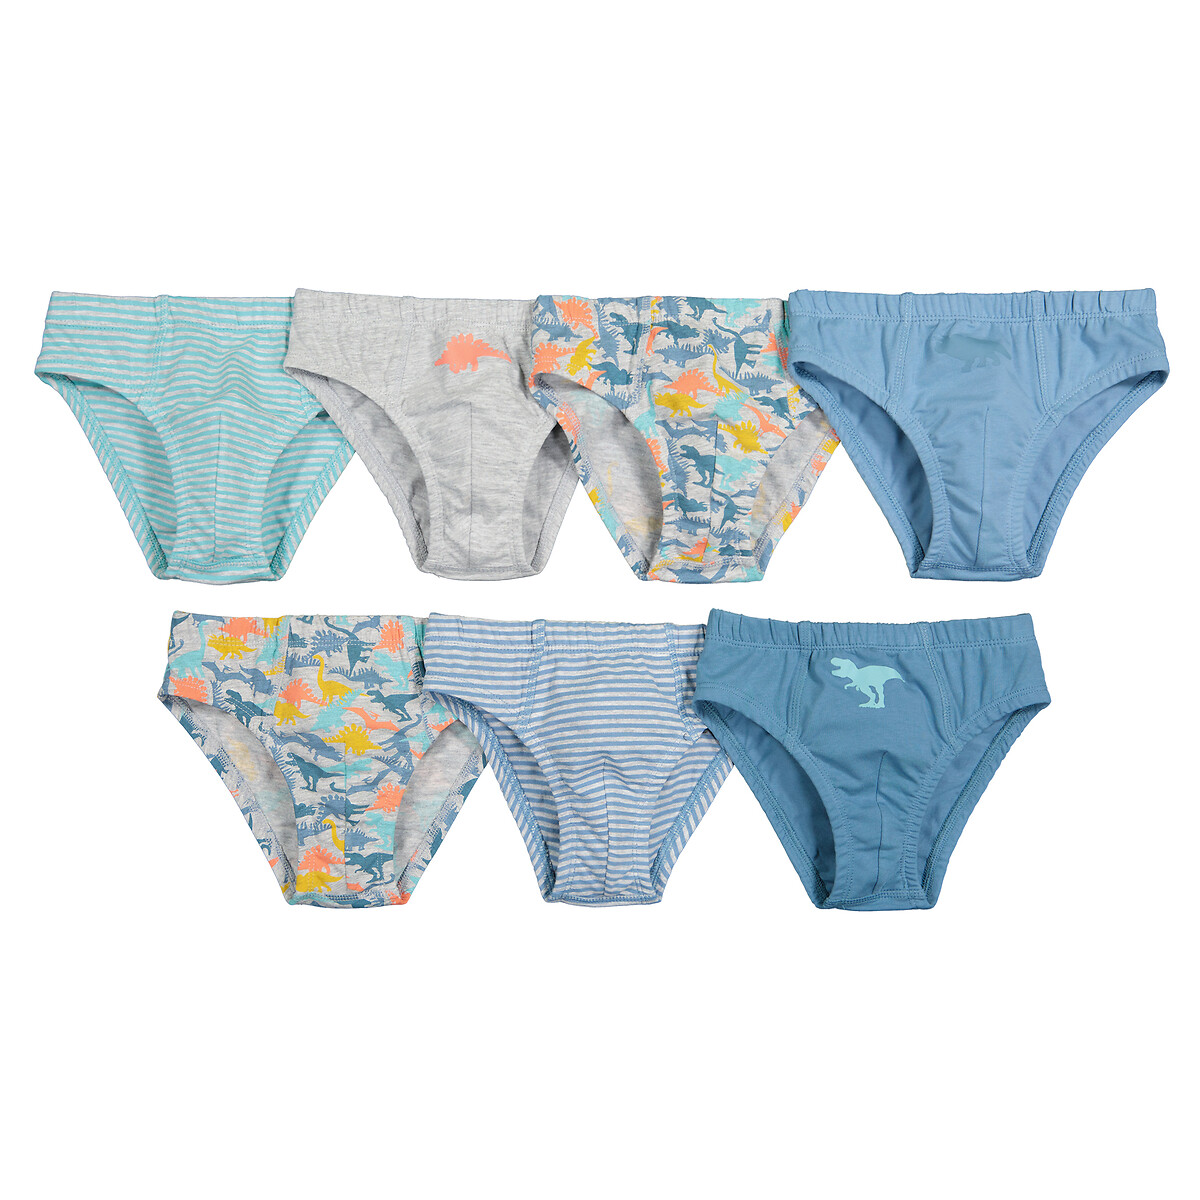 Pack of 7 briefs in dinosaur print cotton, blue + grey, La Redoute